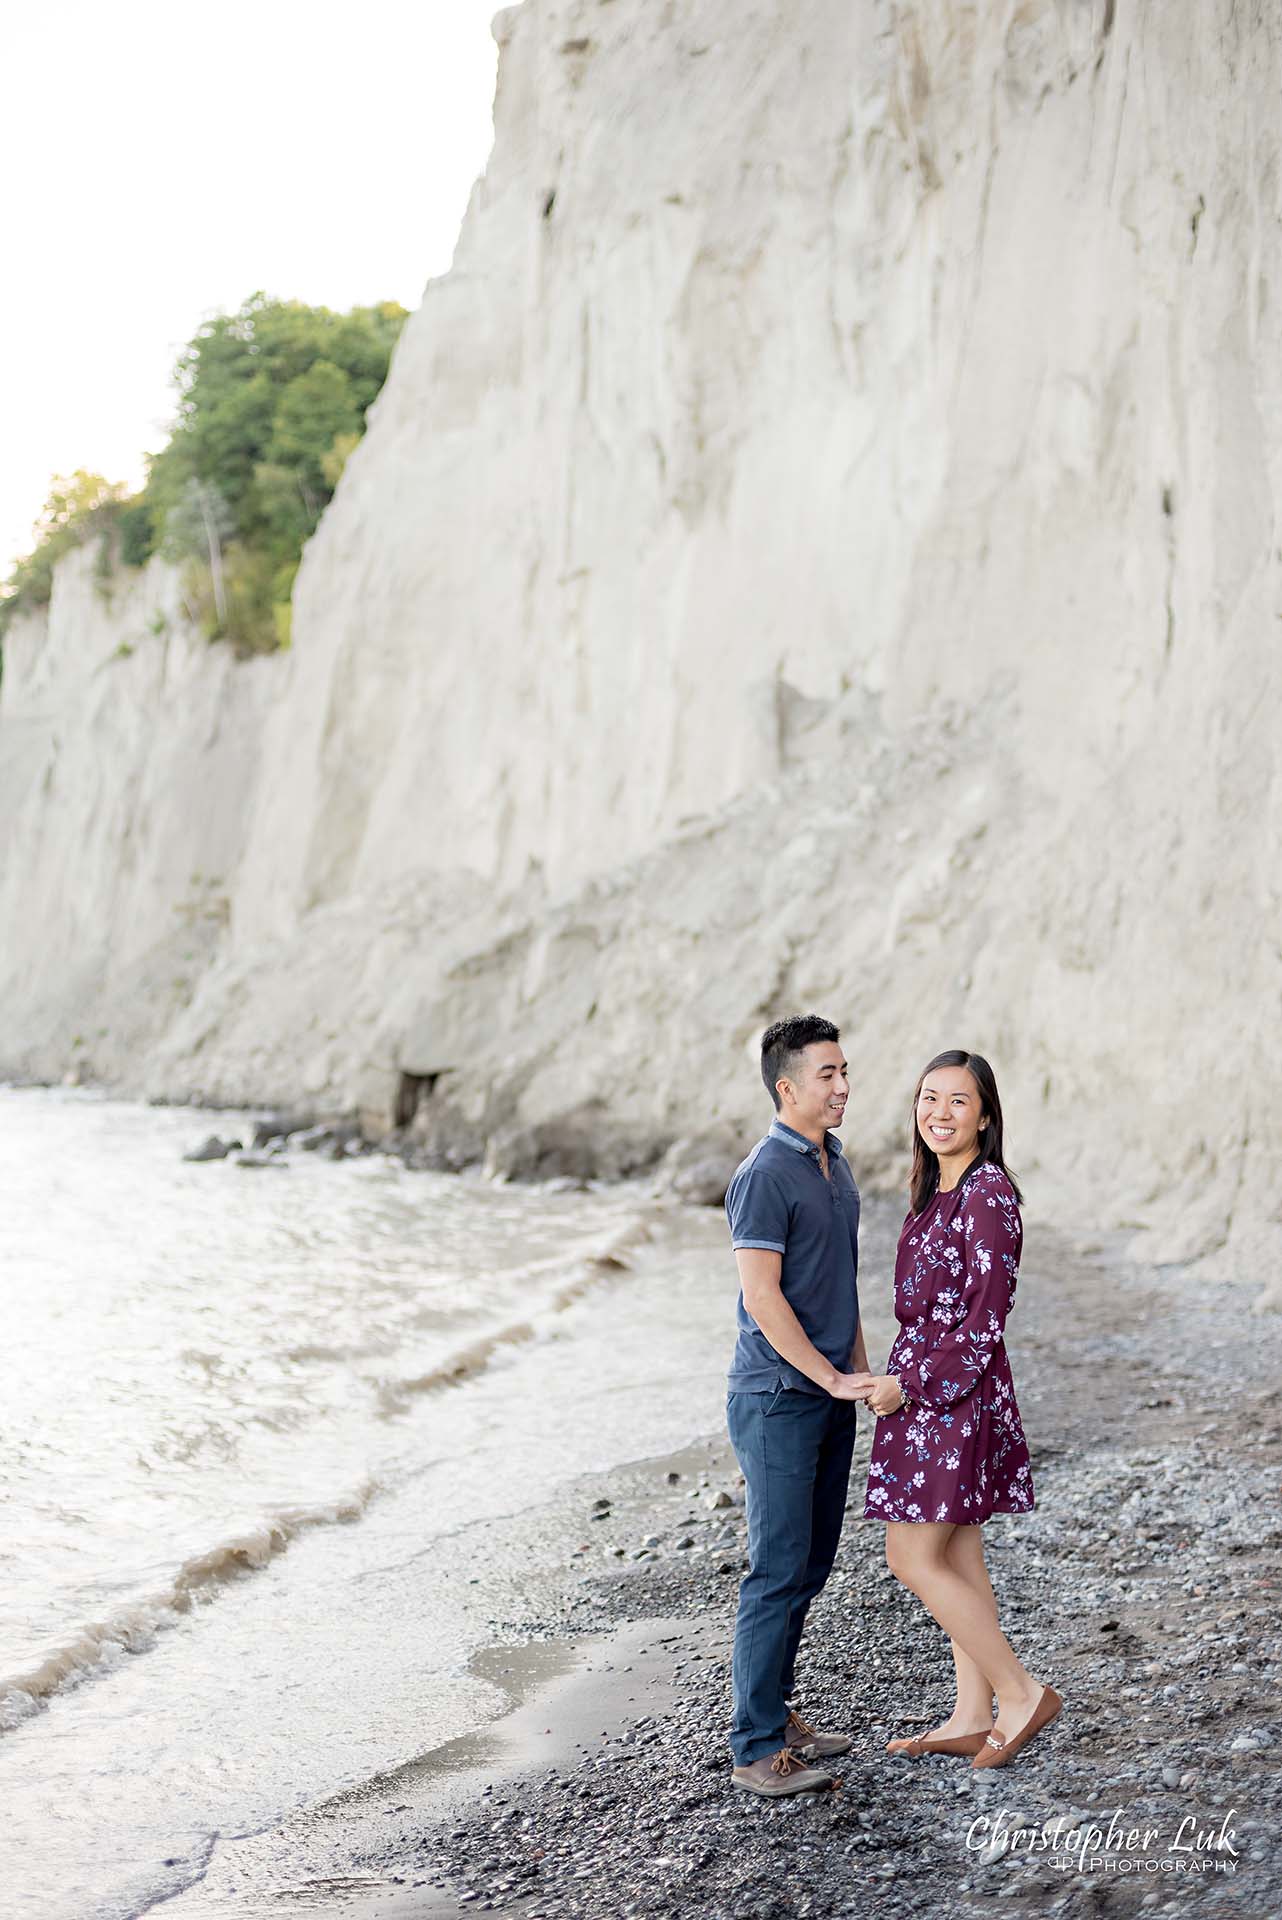 Christopher Luk Toronto Photographer Scarborough Bluffs Beach Park Sunset Surprise Wedding Marriage Engagement Proposal Candid Natural Photojournalistic Bride Groom Waterfront Water Lake Ontario Background Beachfront Sand Walking Together Holding Hands Edge of Water Smile Stone Portrait Laugh